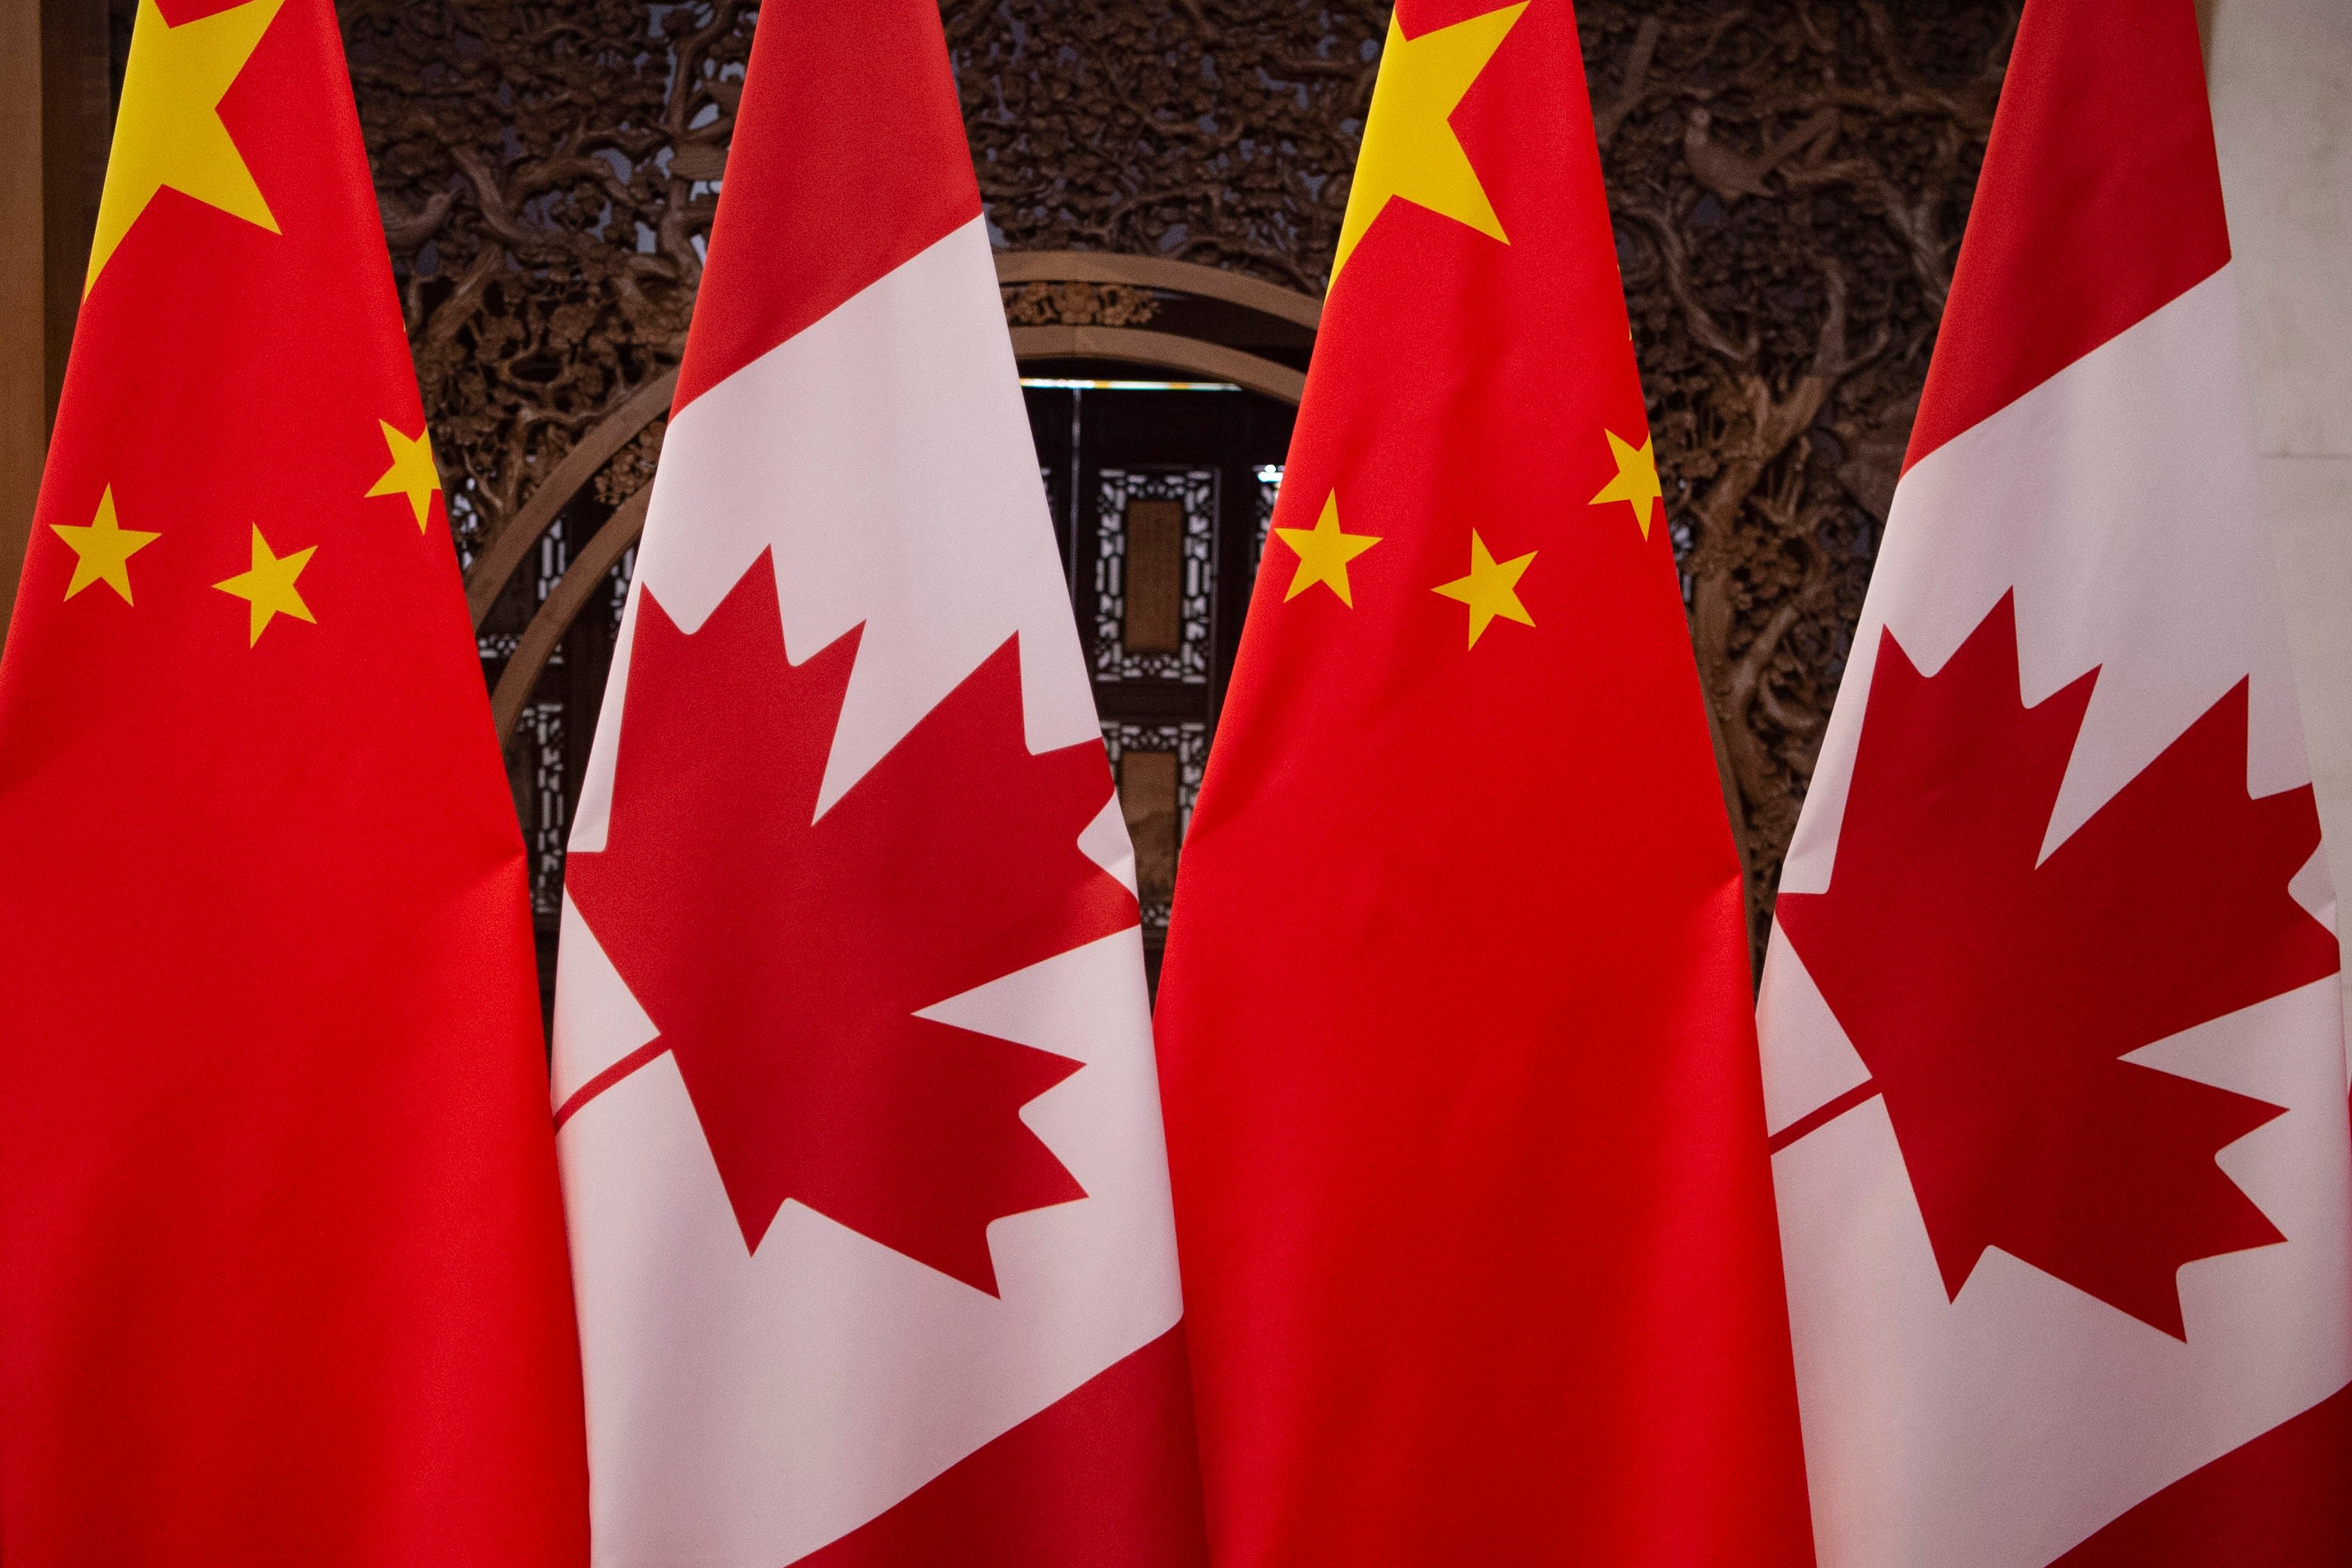 China-Canada ties have been strained in recent years. File photo: AFP